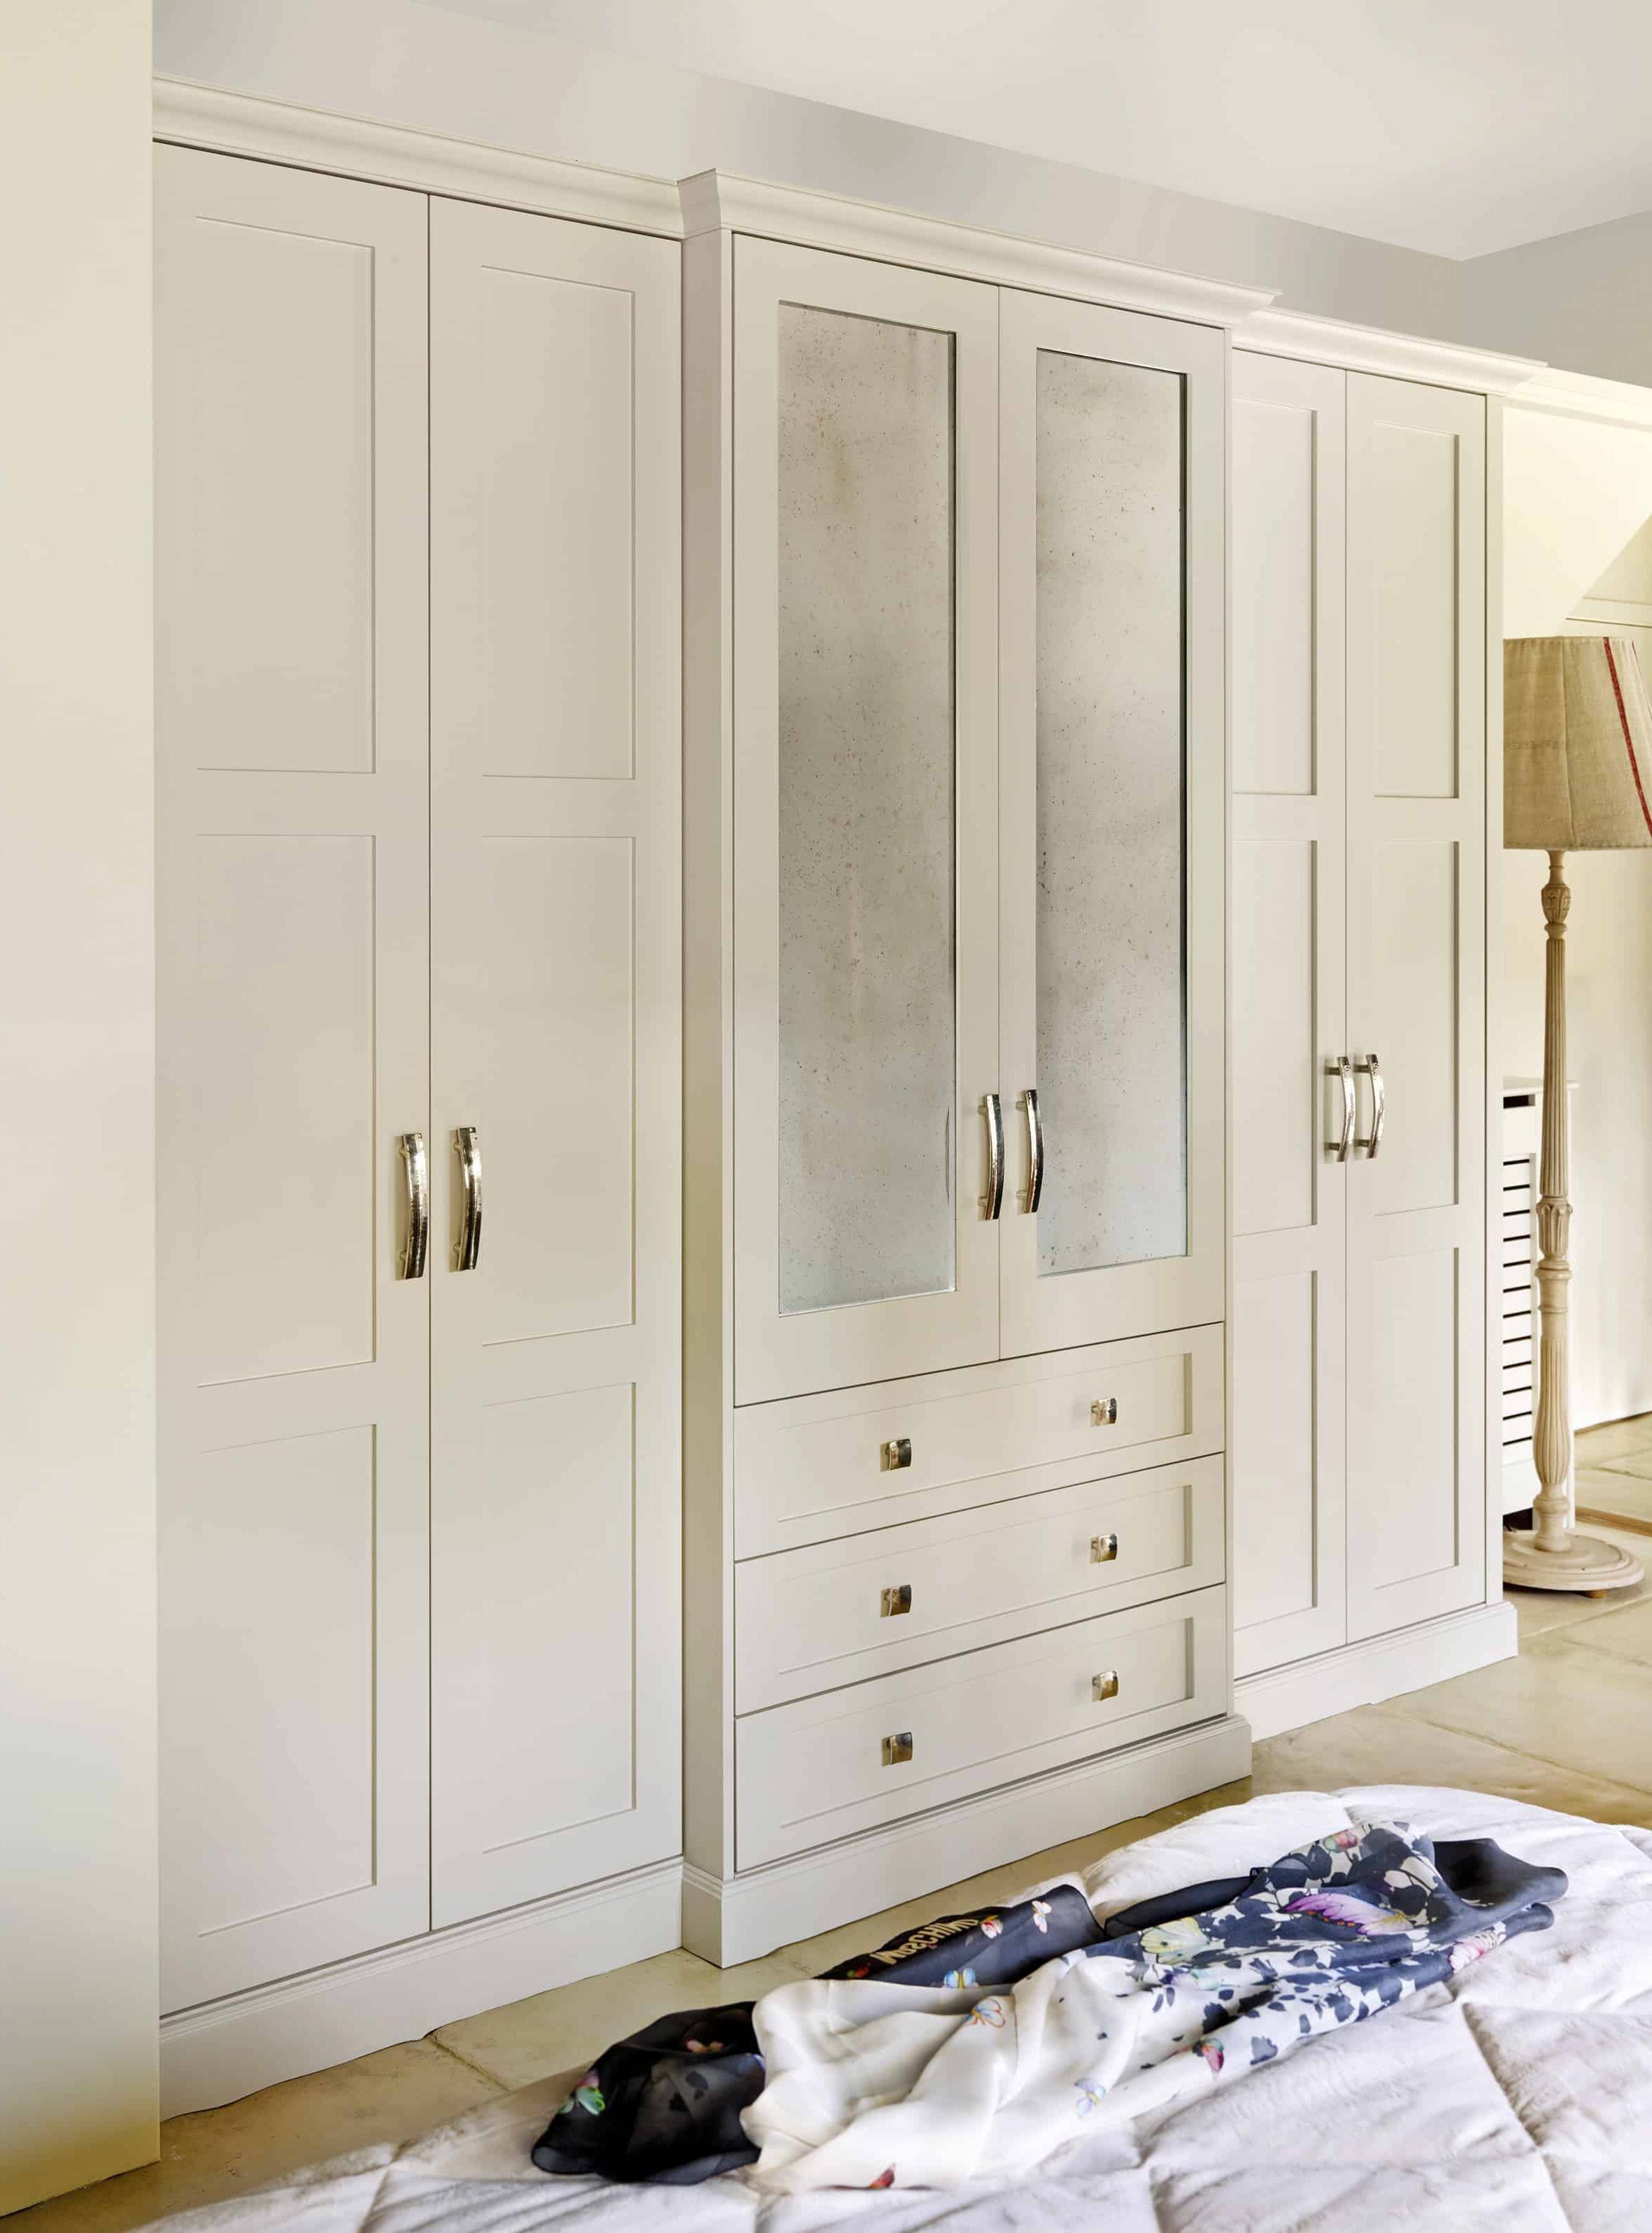 Bespoke Shaker Style Wardrobes | John Lewis Of Hungerford Inside Traditional Wardrobes (View 15 of 20)